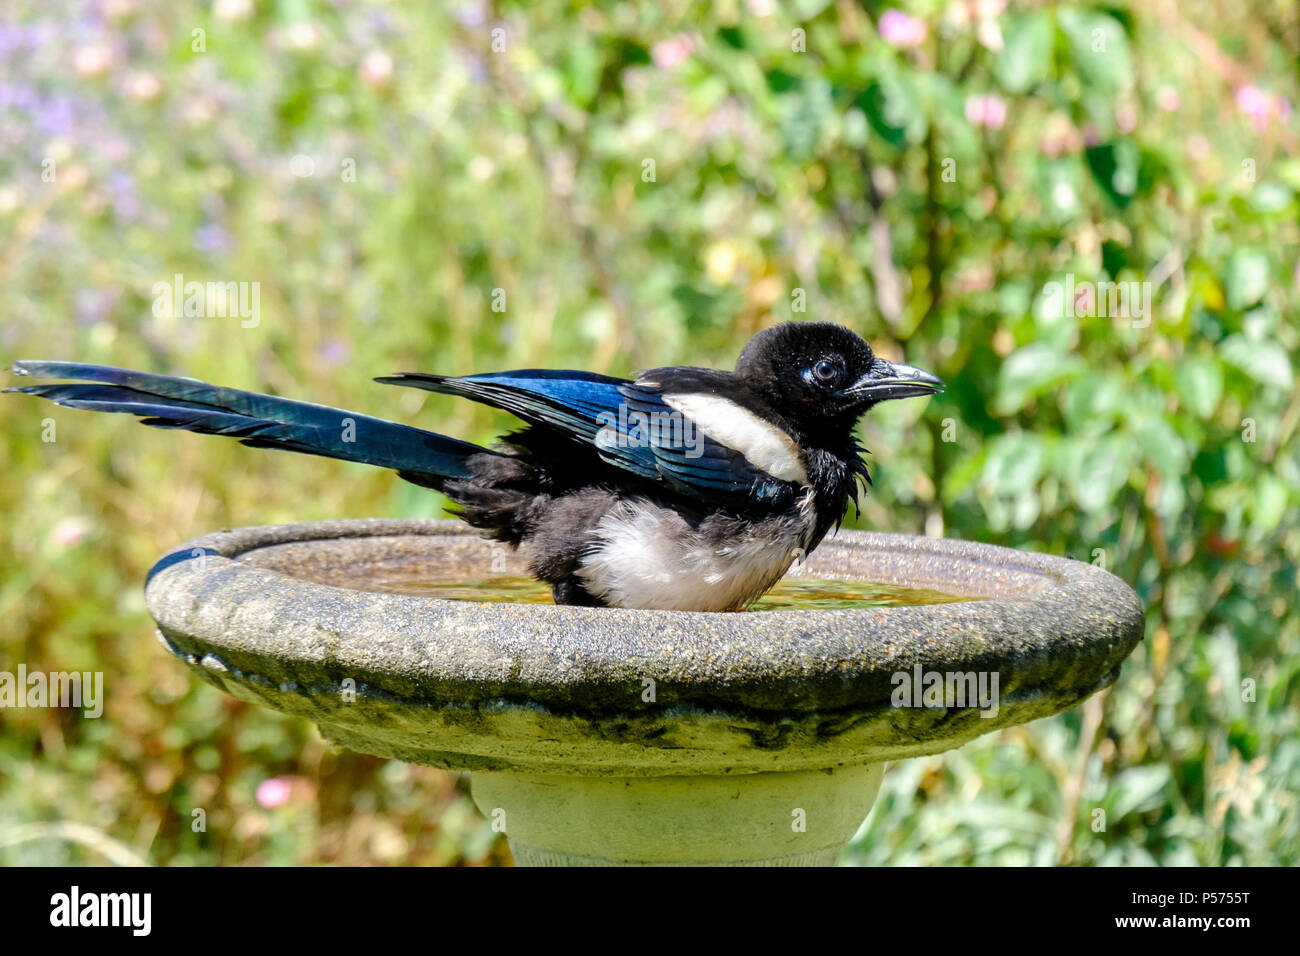 A young magpie cools off in a garden birdbath on a hot day. London UK. Stock Photo